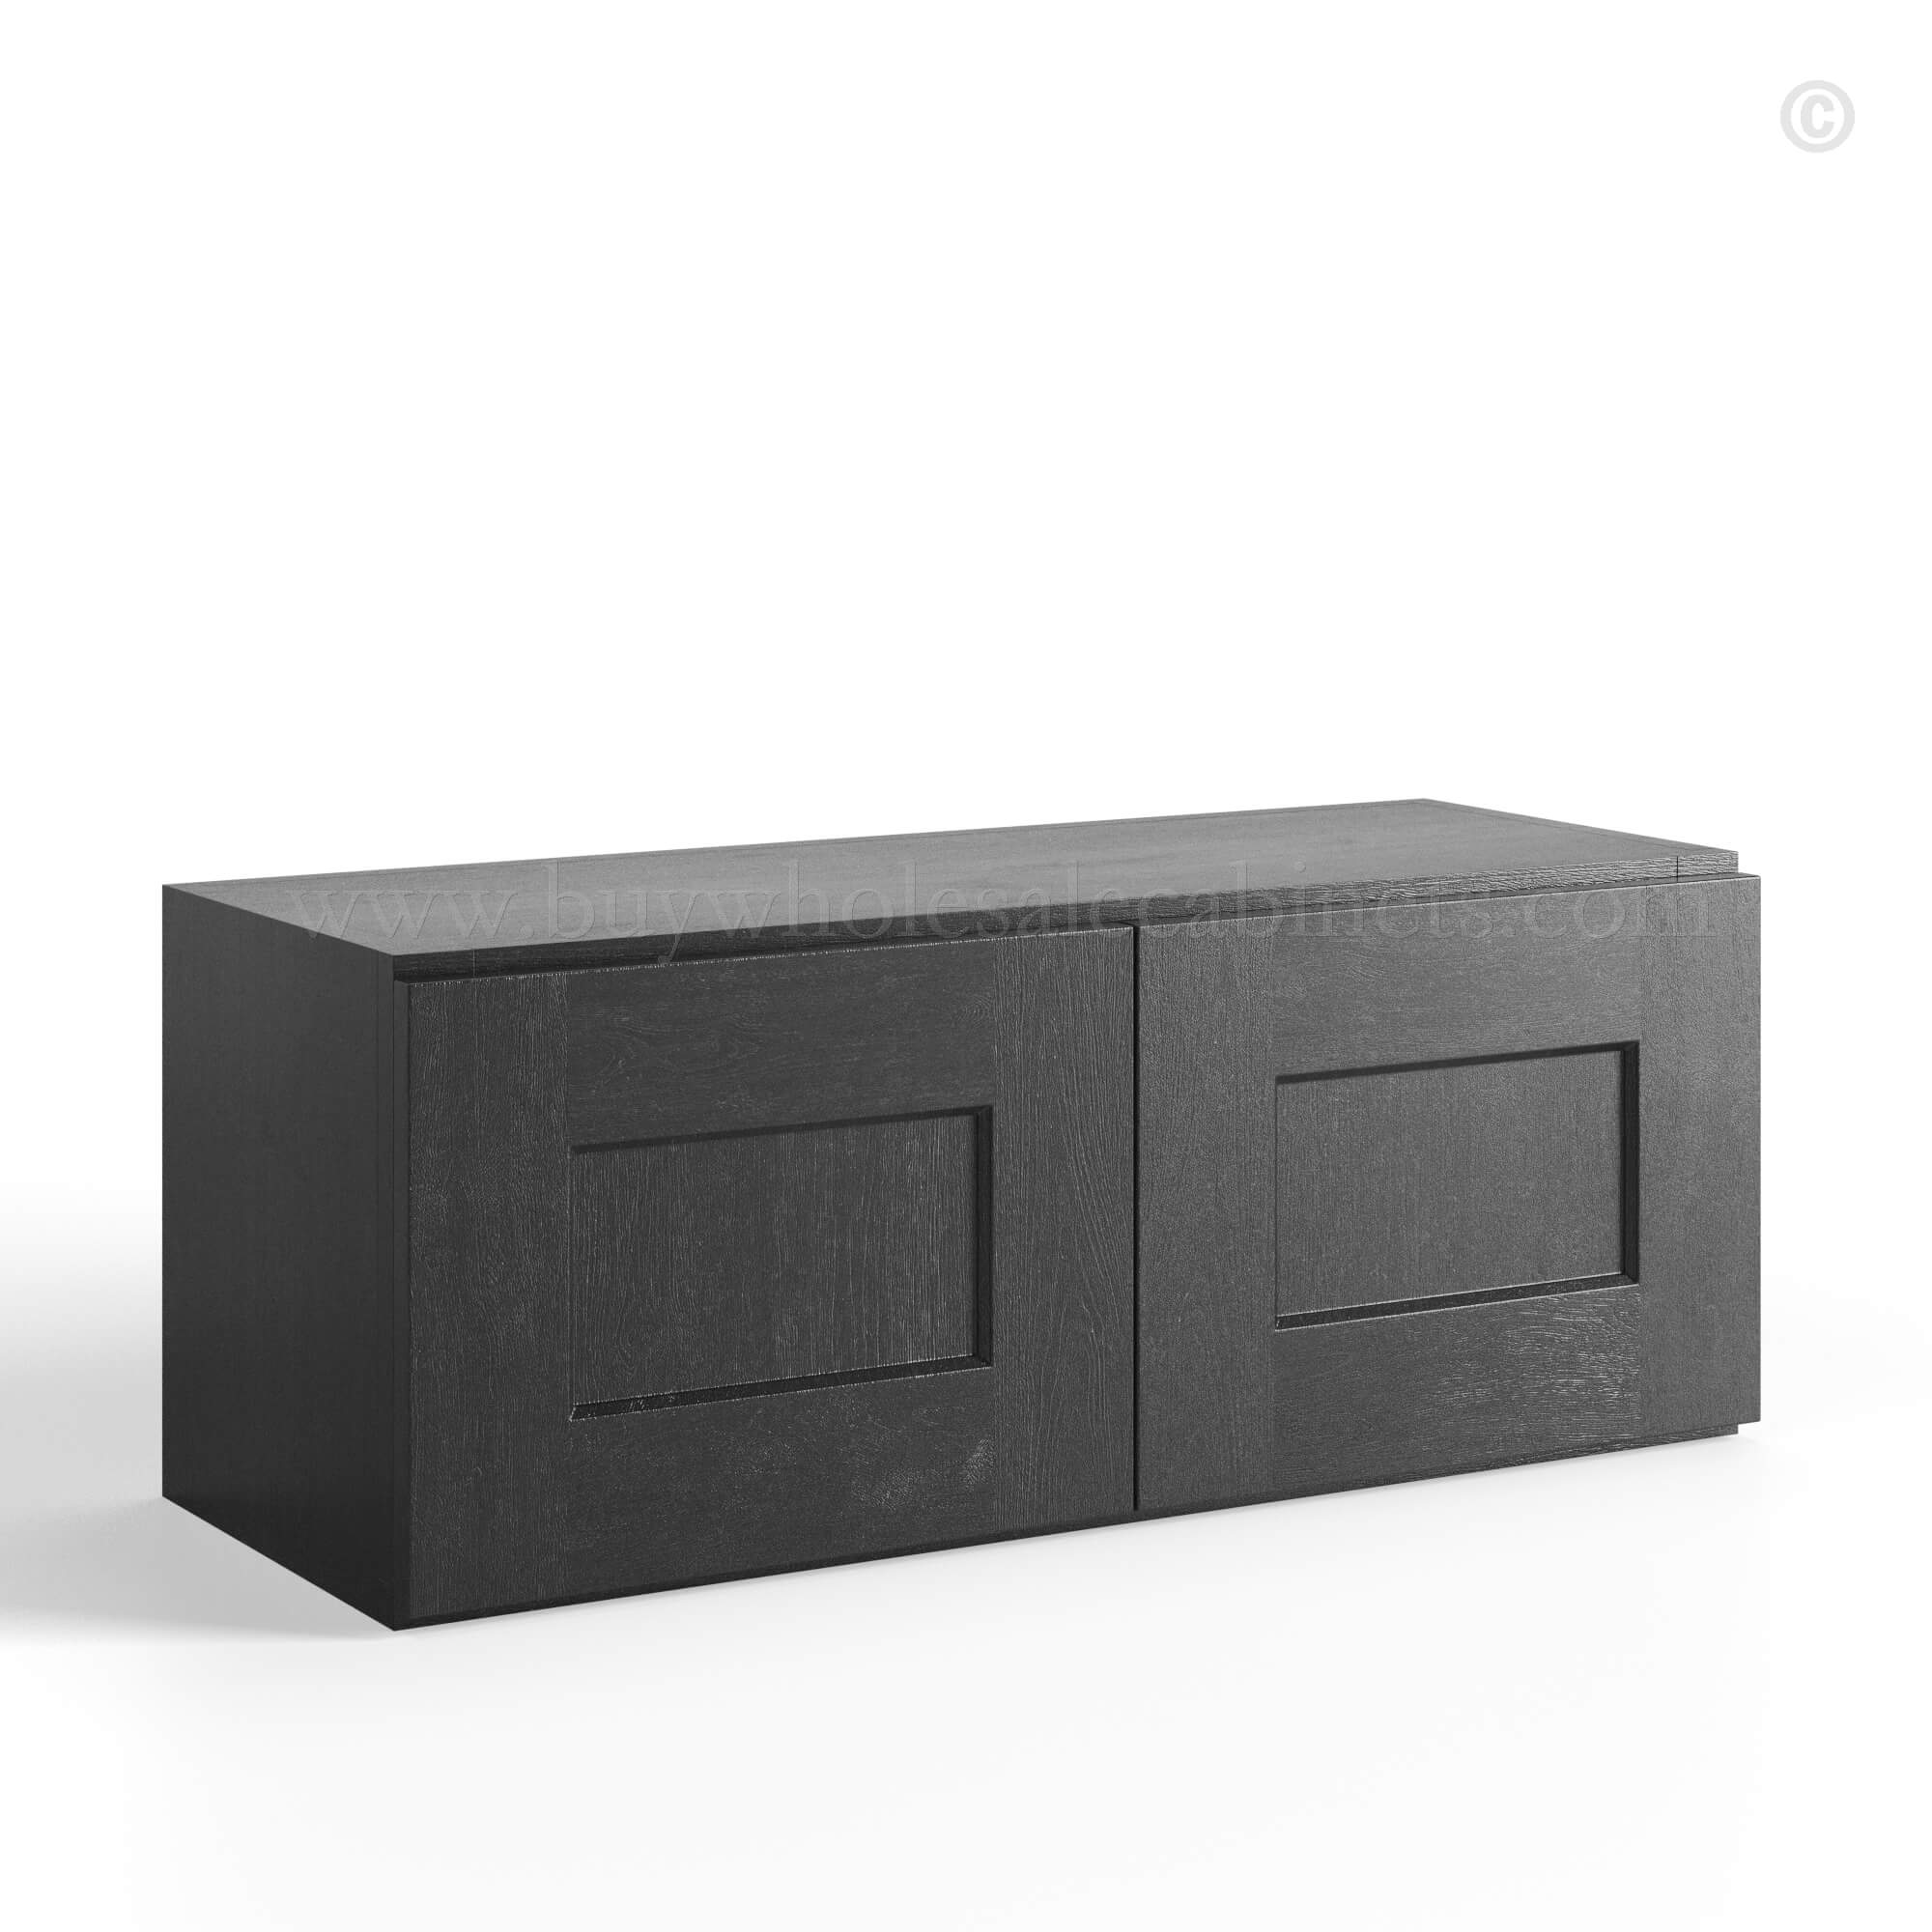 Charcoal Black Shaker Double Door Wall Cabinets 12H, rta cabinets, wholesale cabinets